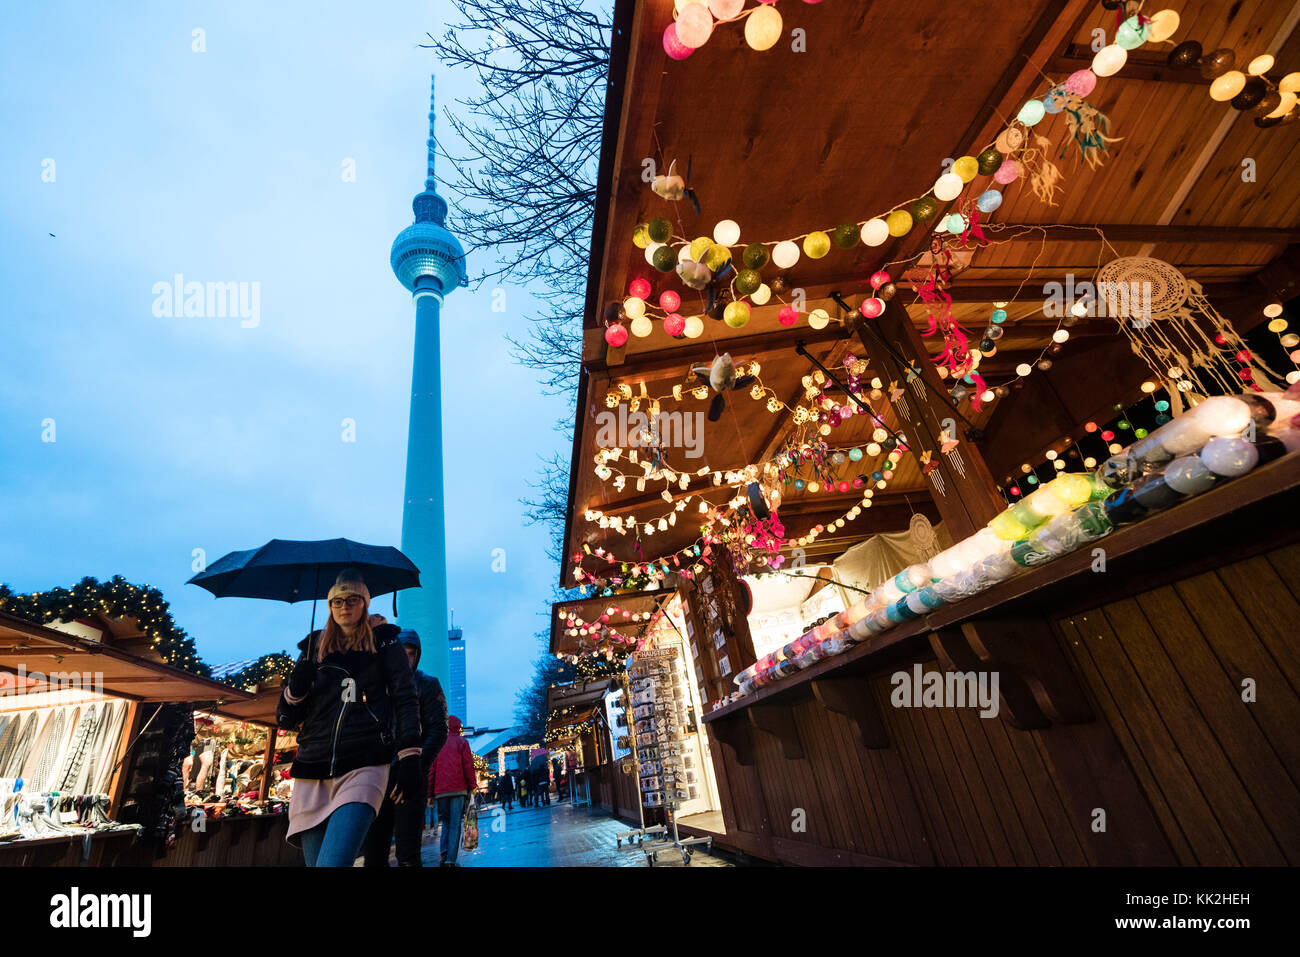 Berlin, Germany. 27th Nov, 2017. Christmas market opens at Alexanderplatz in Mitte Berlin. This year concrete barriers have been installed at the entrances to prevent vehicle terror attacks following last year's attack in the city. Credit: Iain Masterton/Alamy Live News Stock Photo